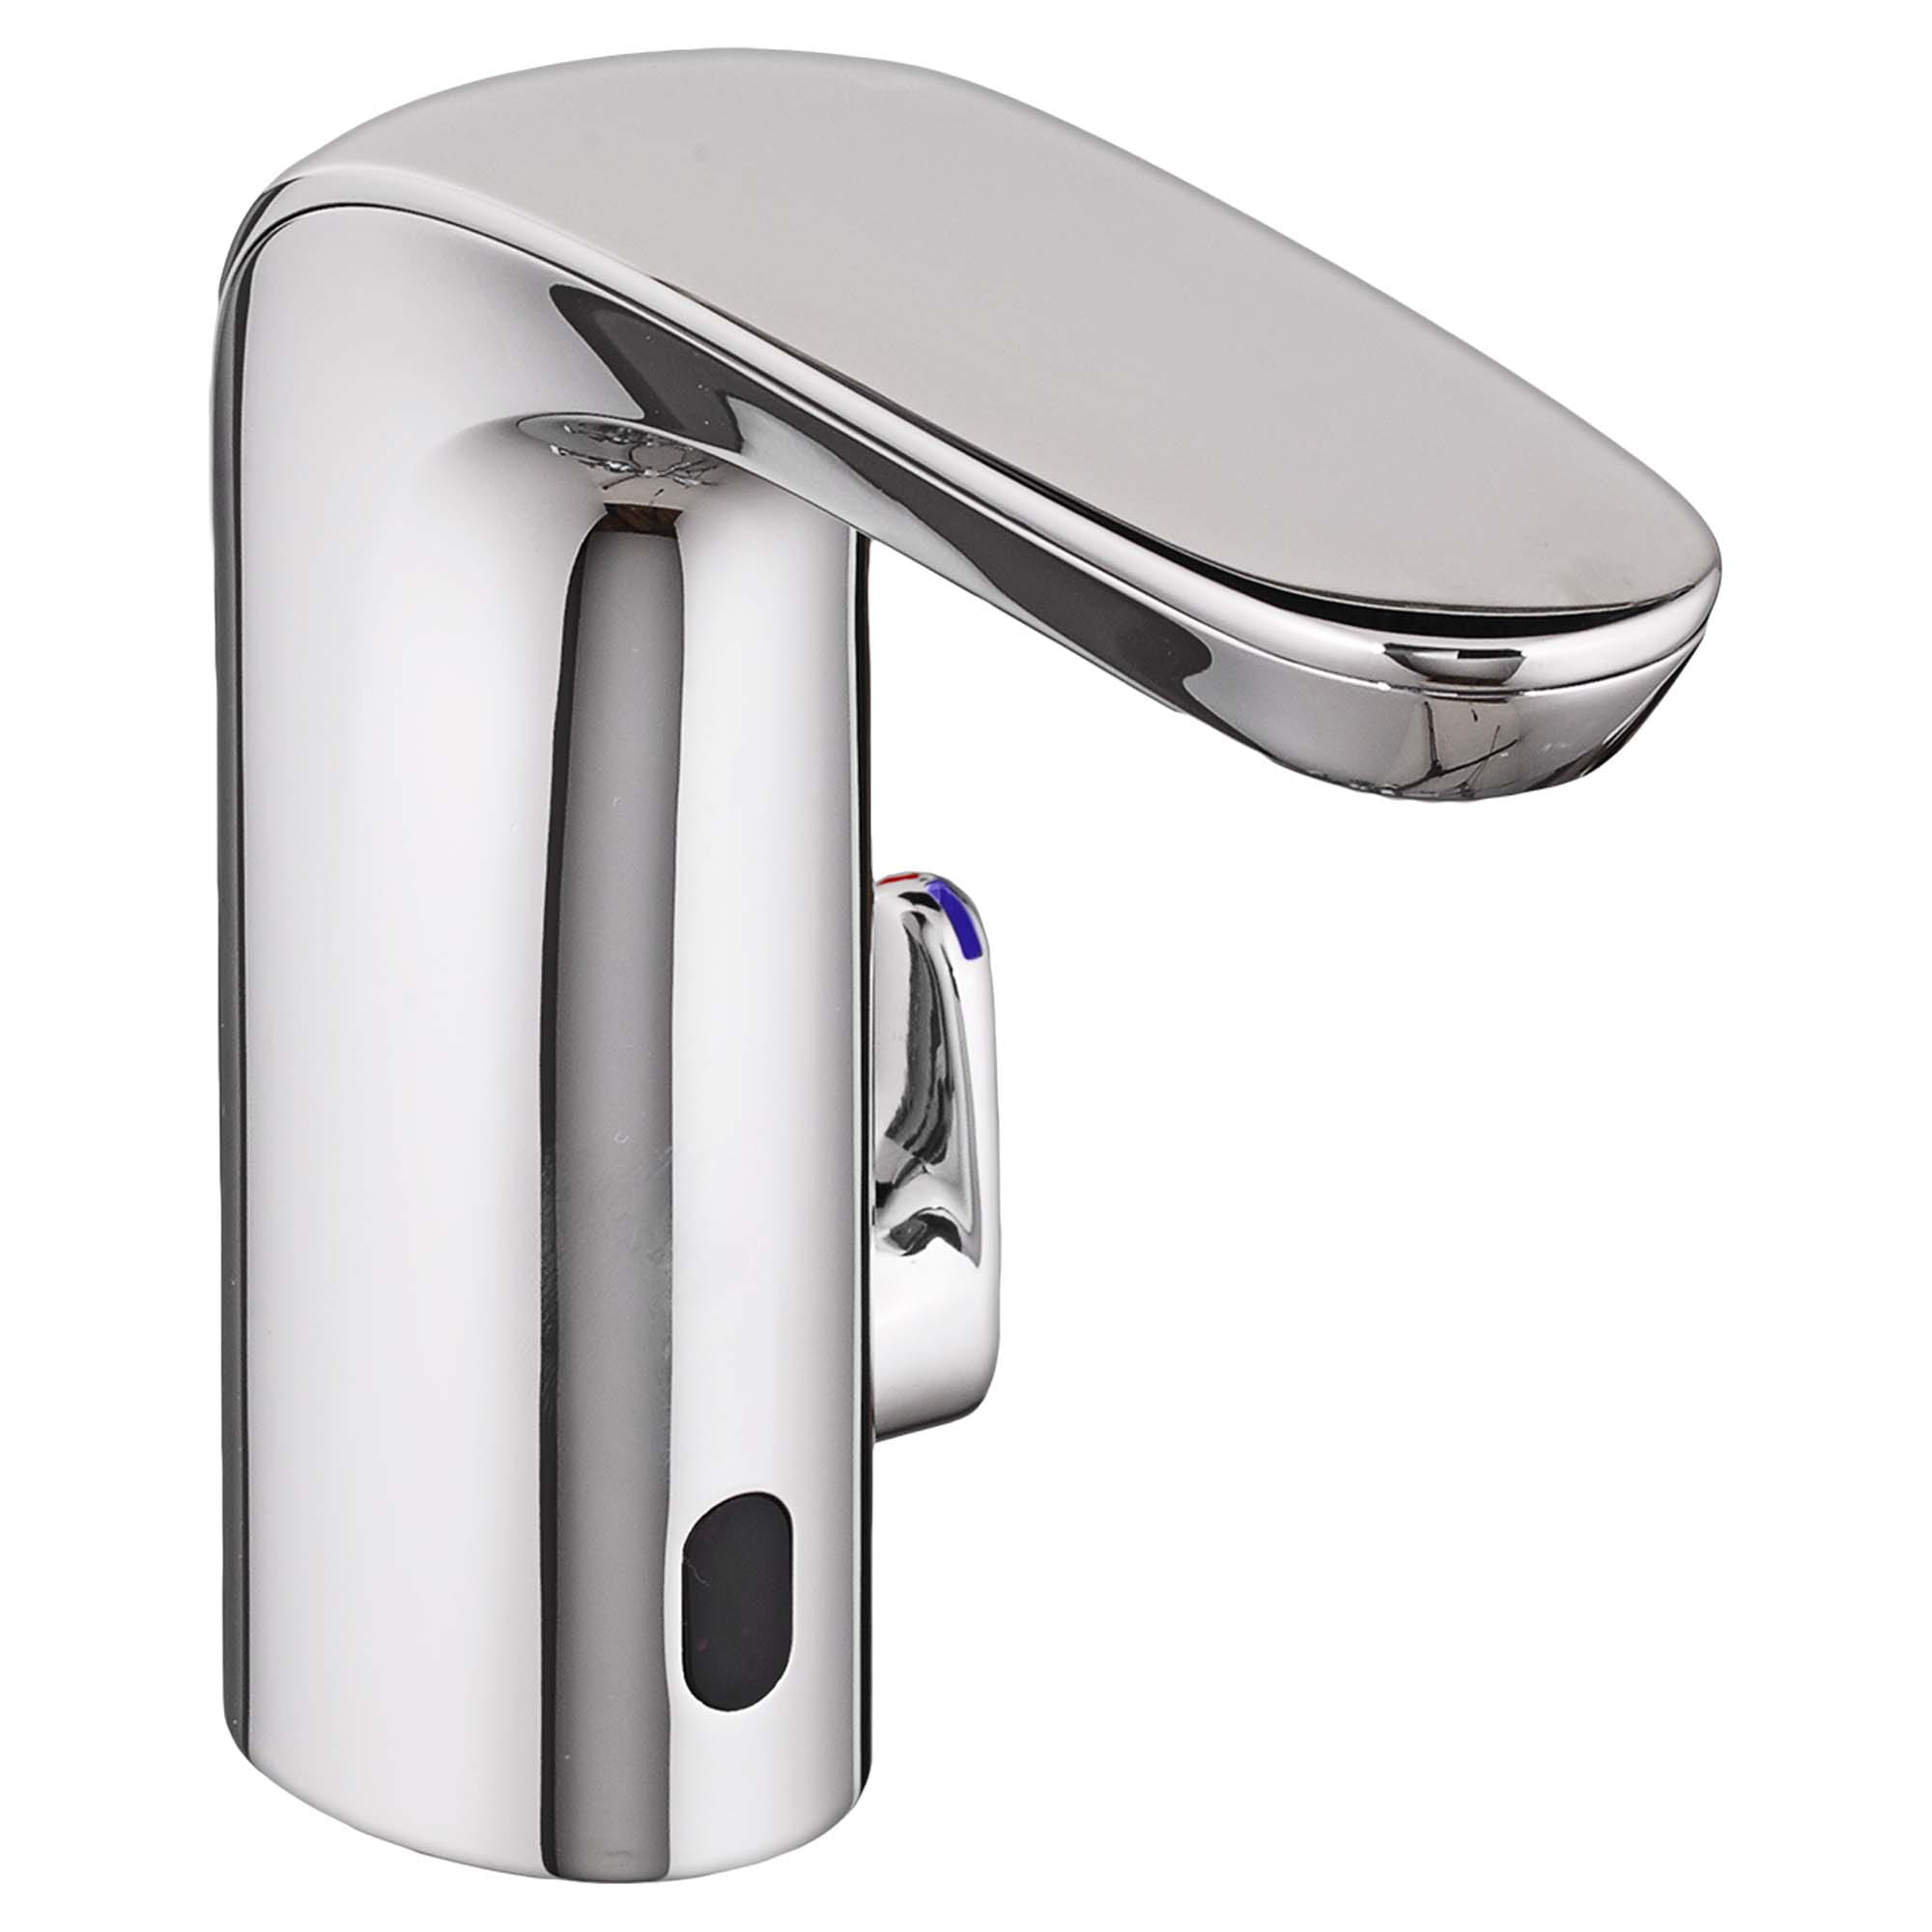 NextGen Selectronic Touchless Faucet Battery Powered With SmarTherm Safety Shut Off  Plus  ADM 05 gpm 19 Lpm   BRUSHED NICKEL